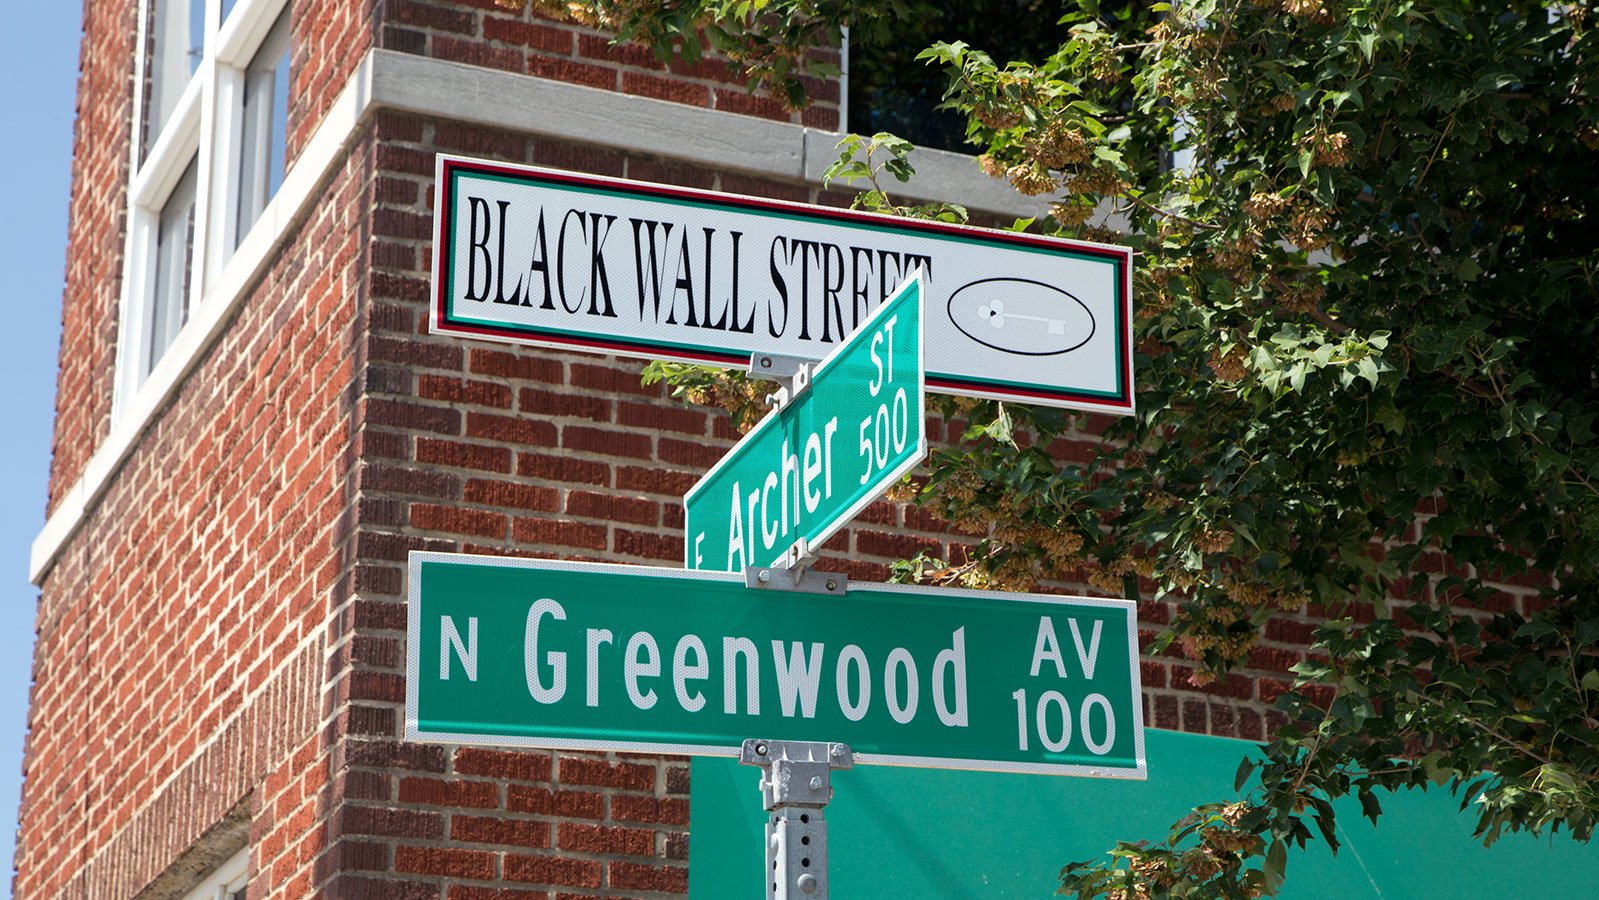 Street signs along Greenwood that commemorate Black Wall Street